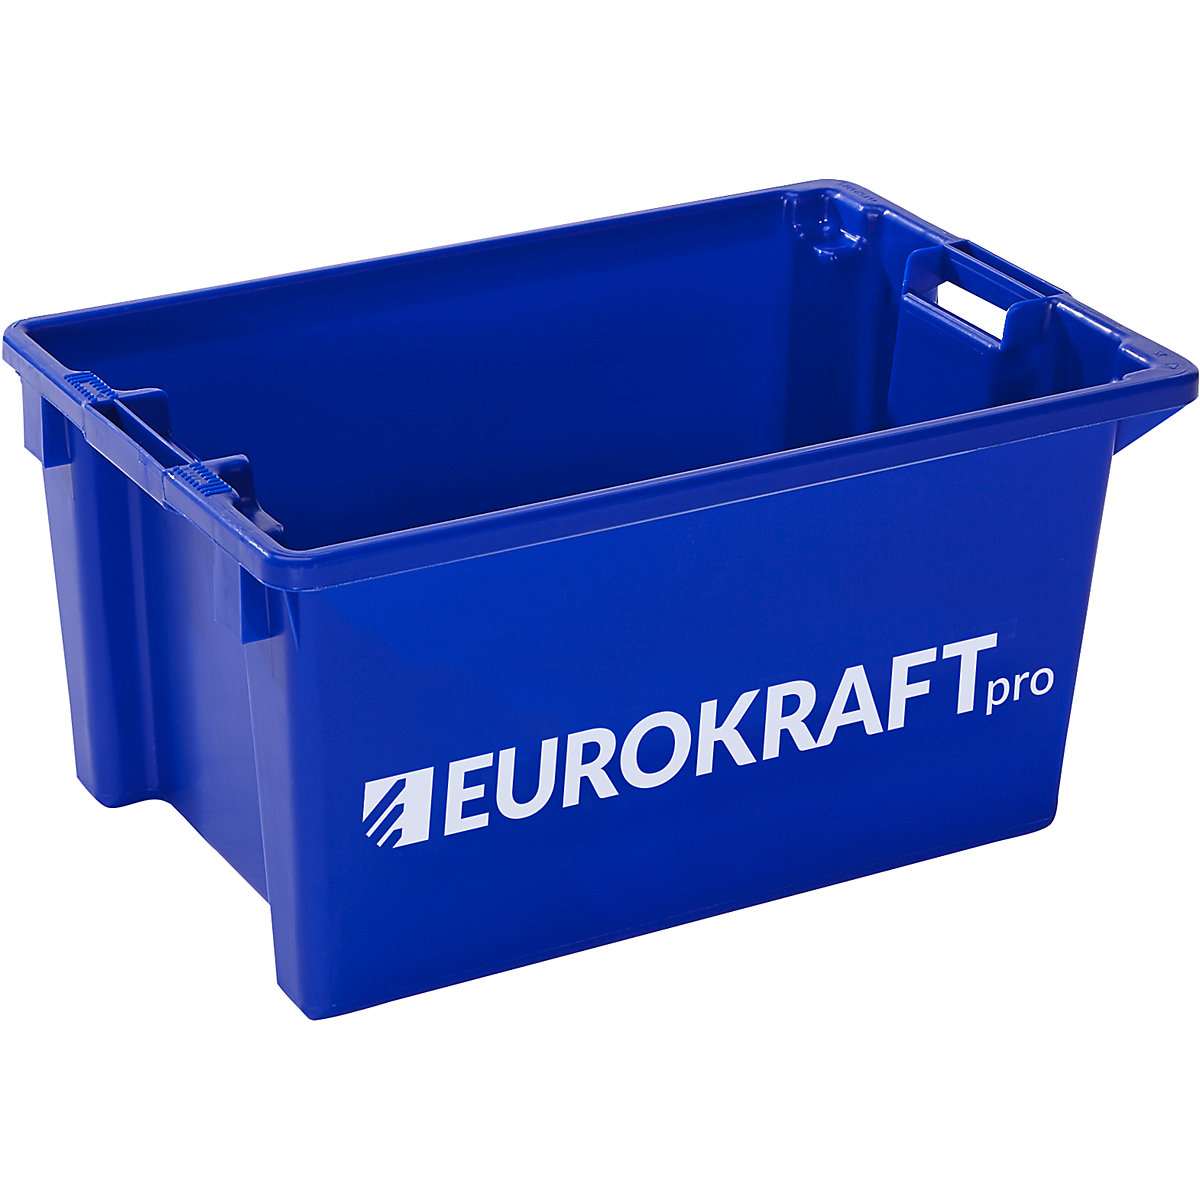 Stack/nest container - eurokraft pro